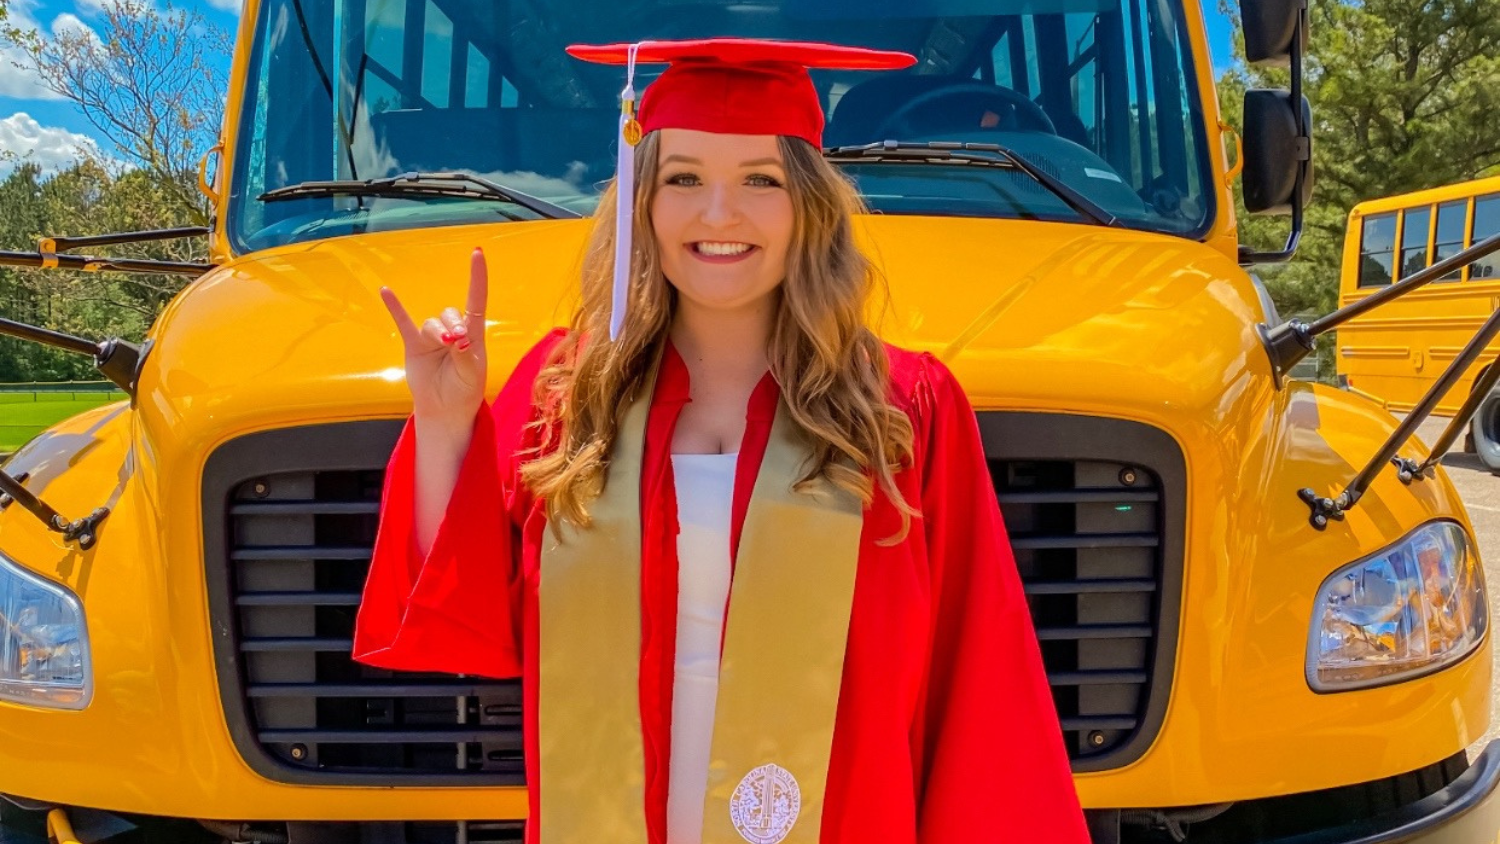 Kailee Storie in cap and gown standing in front of a school bus.